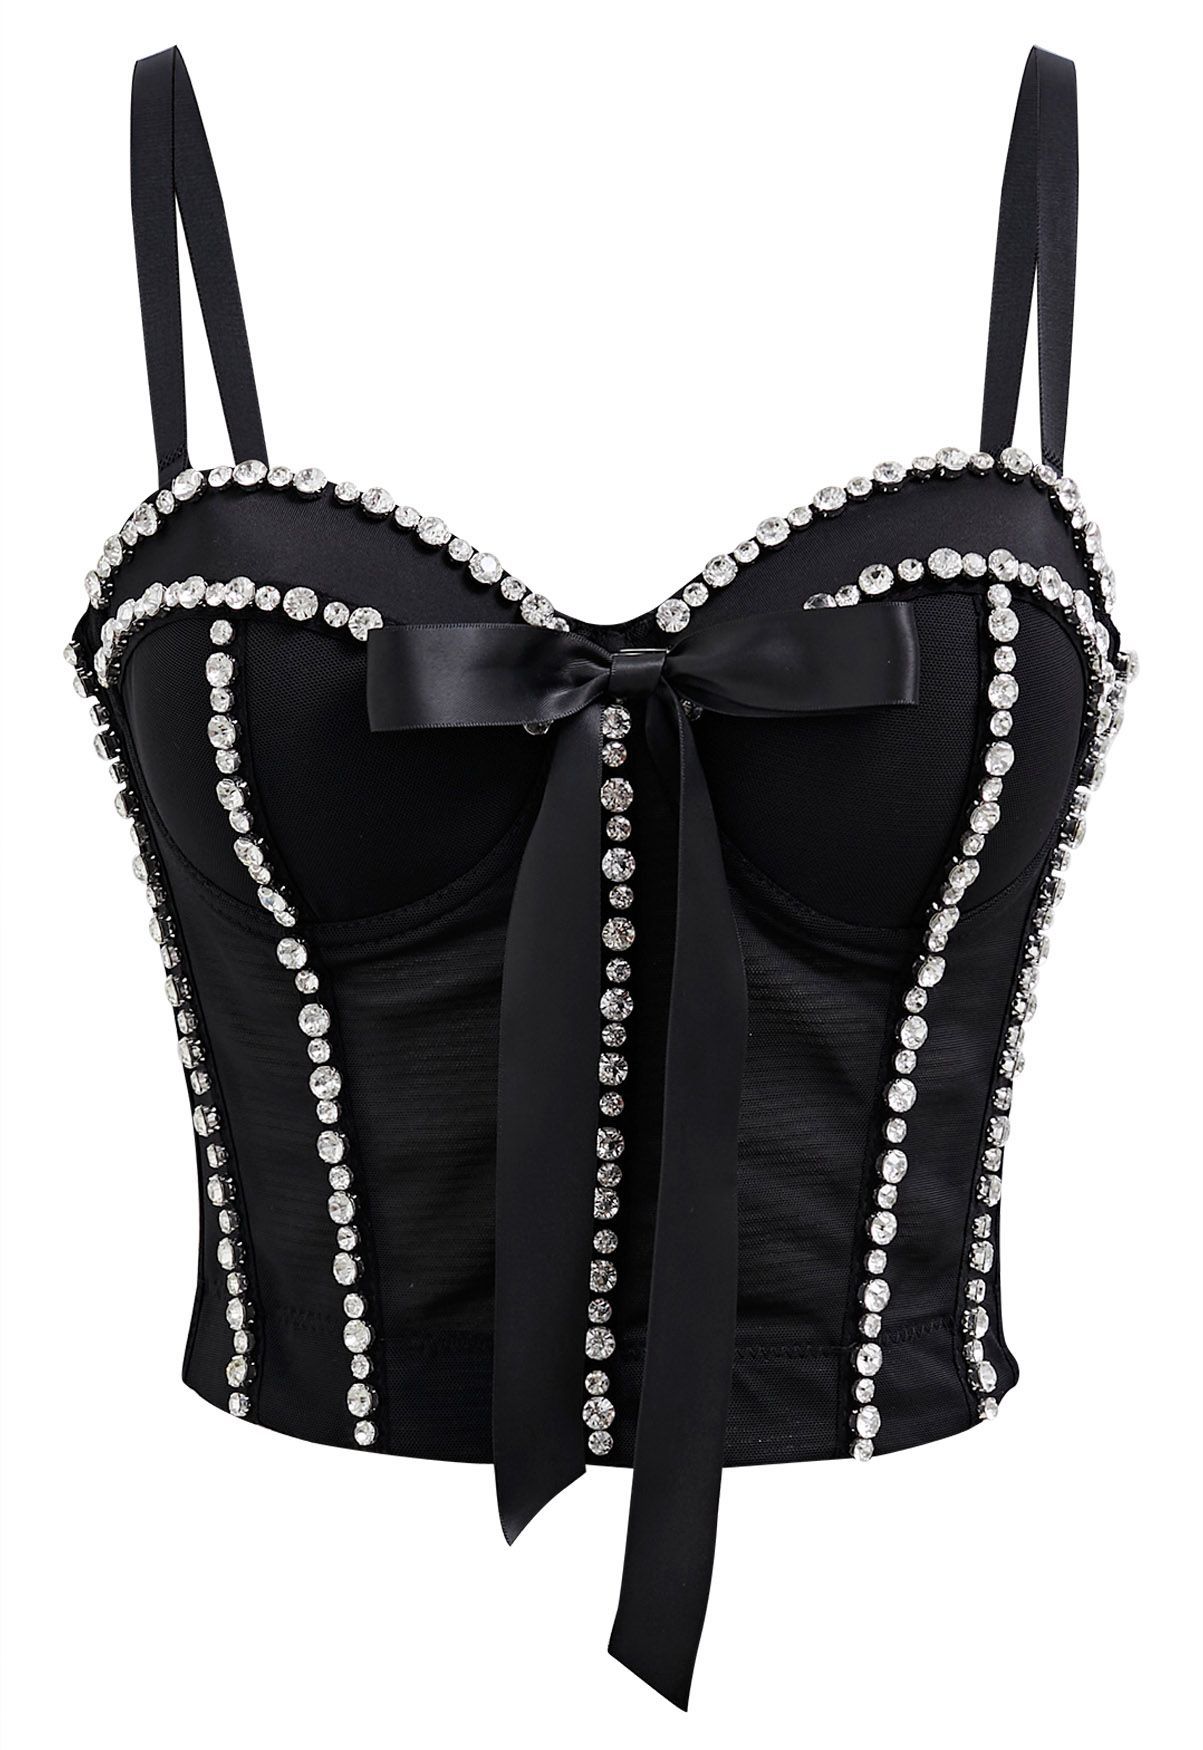 Bowknot Rhinestone Embellished Bustier Crop Top in Black | Chicwish